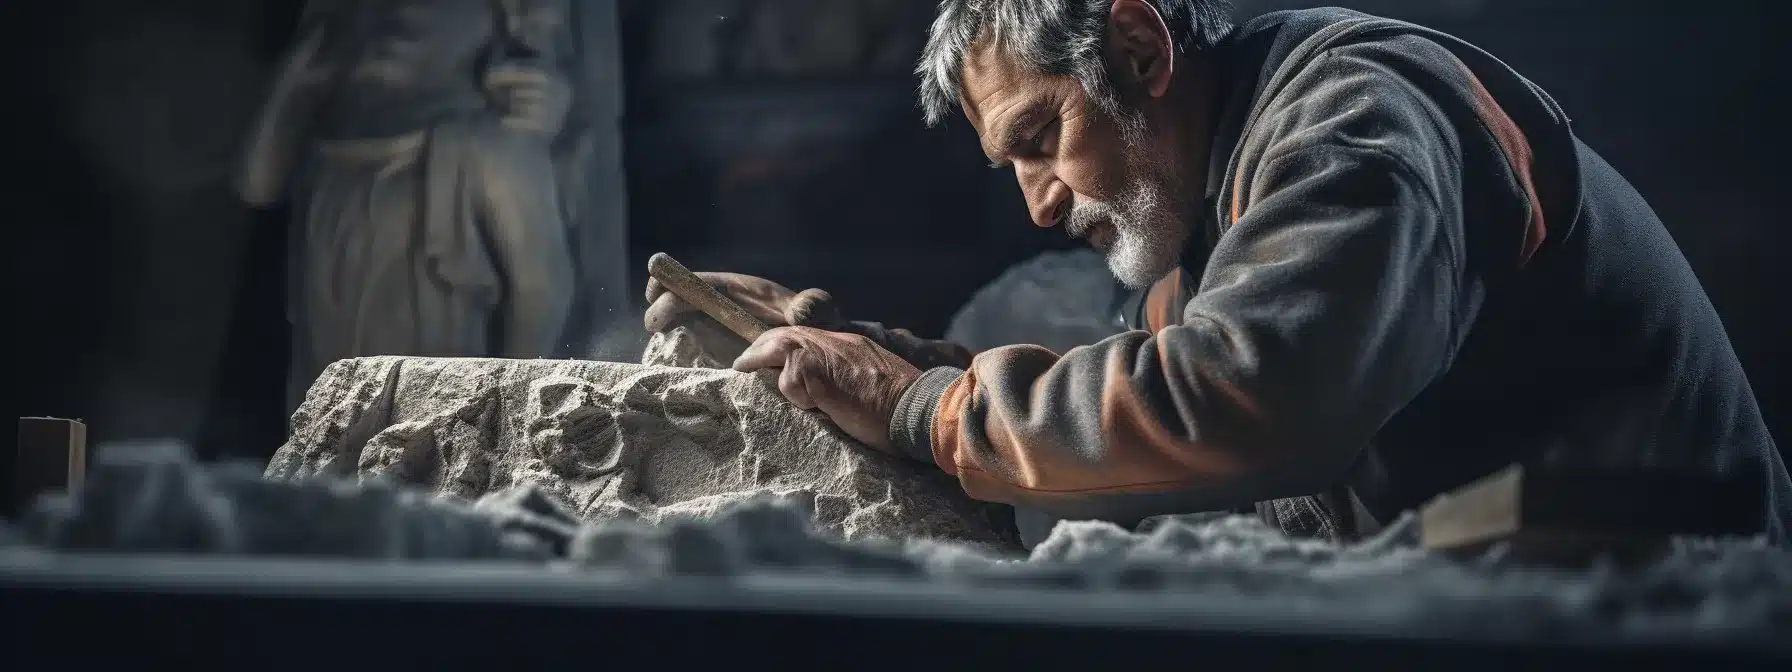 A Sculptor Chiseling A Masterpiece From A Stone Representing The Brand'S Positioning Strategy.